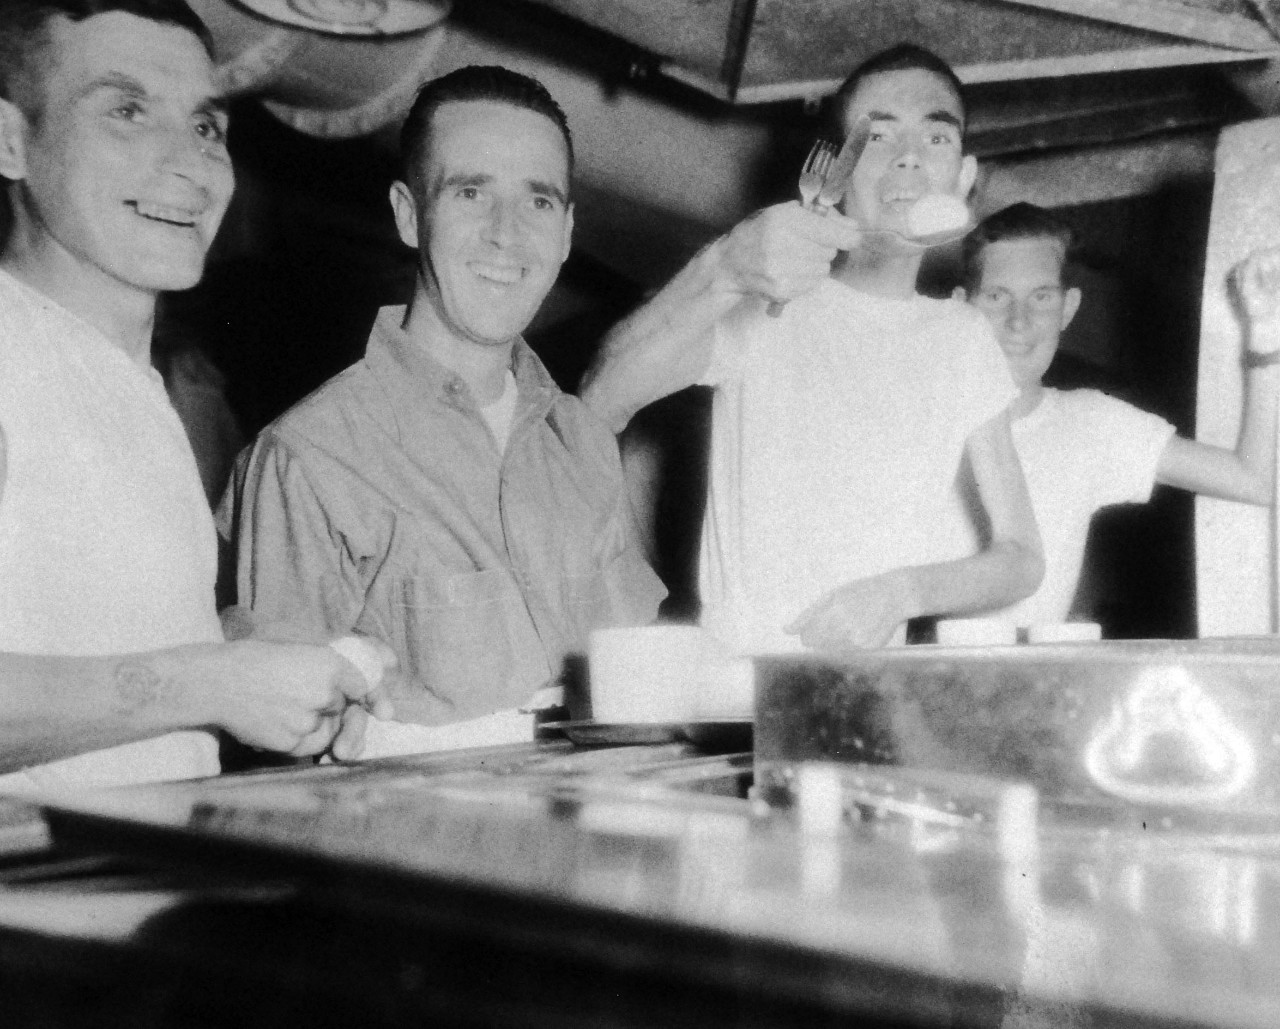 80-G-343559:    Allied Prisoners of War, 1945.   Liberated British and Australian prisoners from a Formosan prison camp get their first real meal on board USS Block Island (CVE-106) after three years confinement.   Photographed by Photographer’s Mate First Class T.K. Brett and Marine M. J. Kane (rank not given), September 5, 1945.   Official U.S. Navy photograph, now in the collection of the National Archives.  (2014/05/22).   The original photograph is small.   